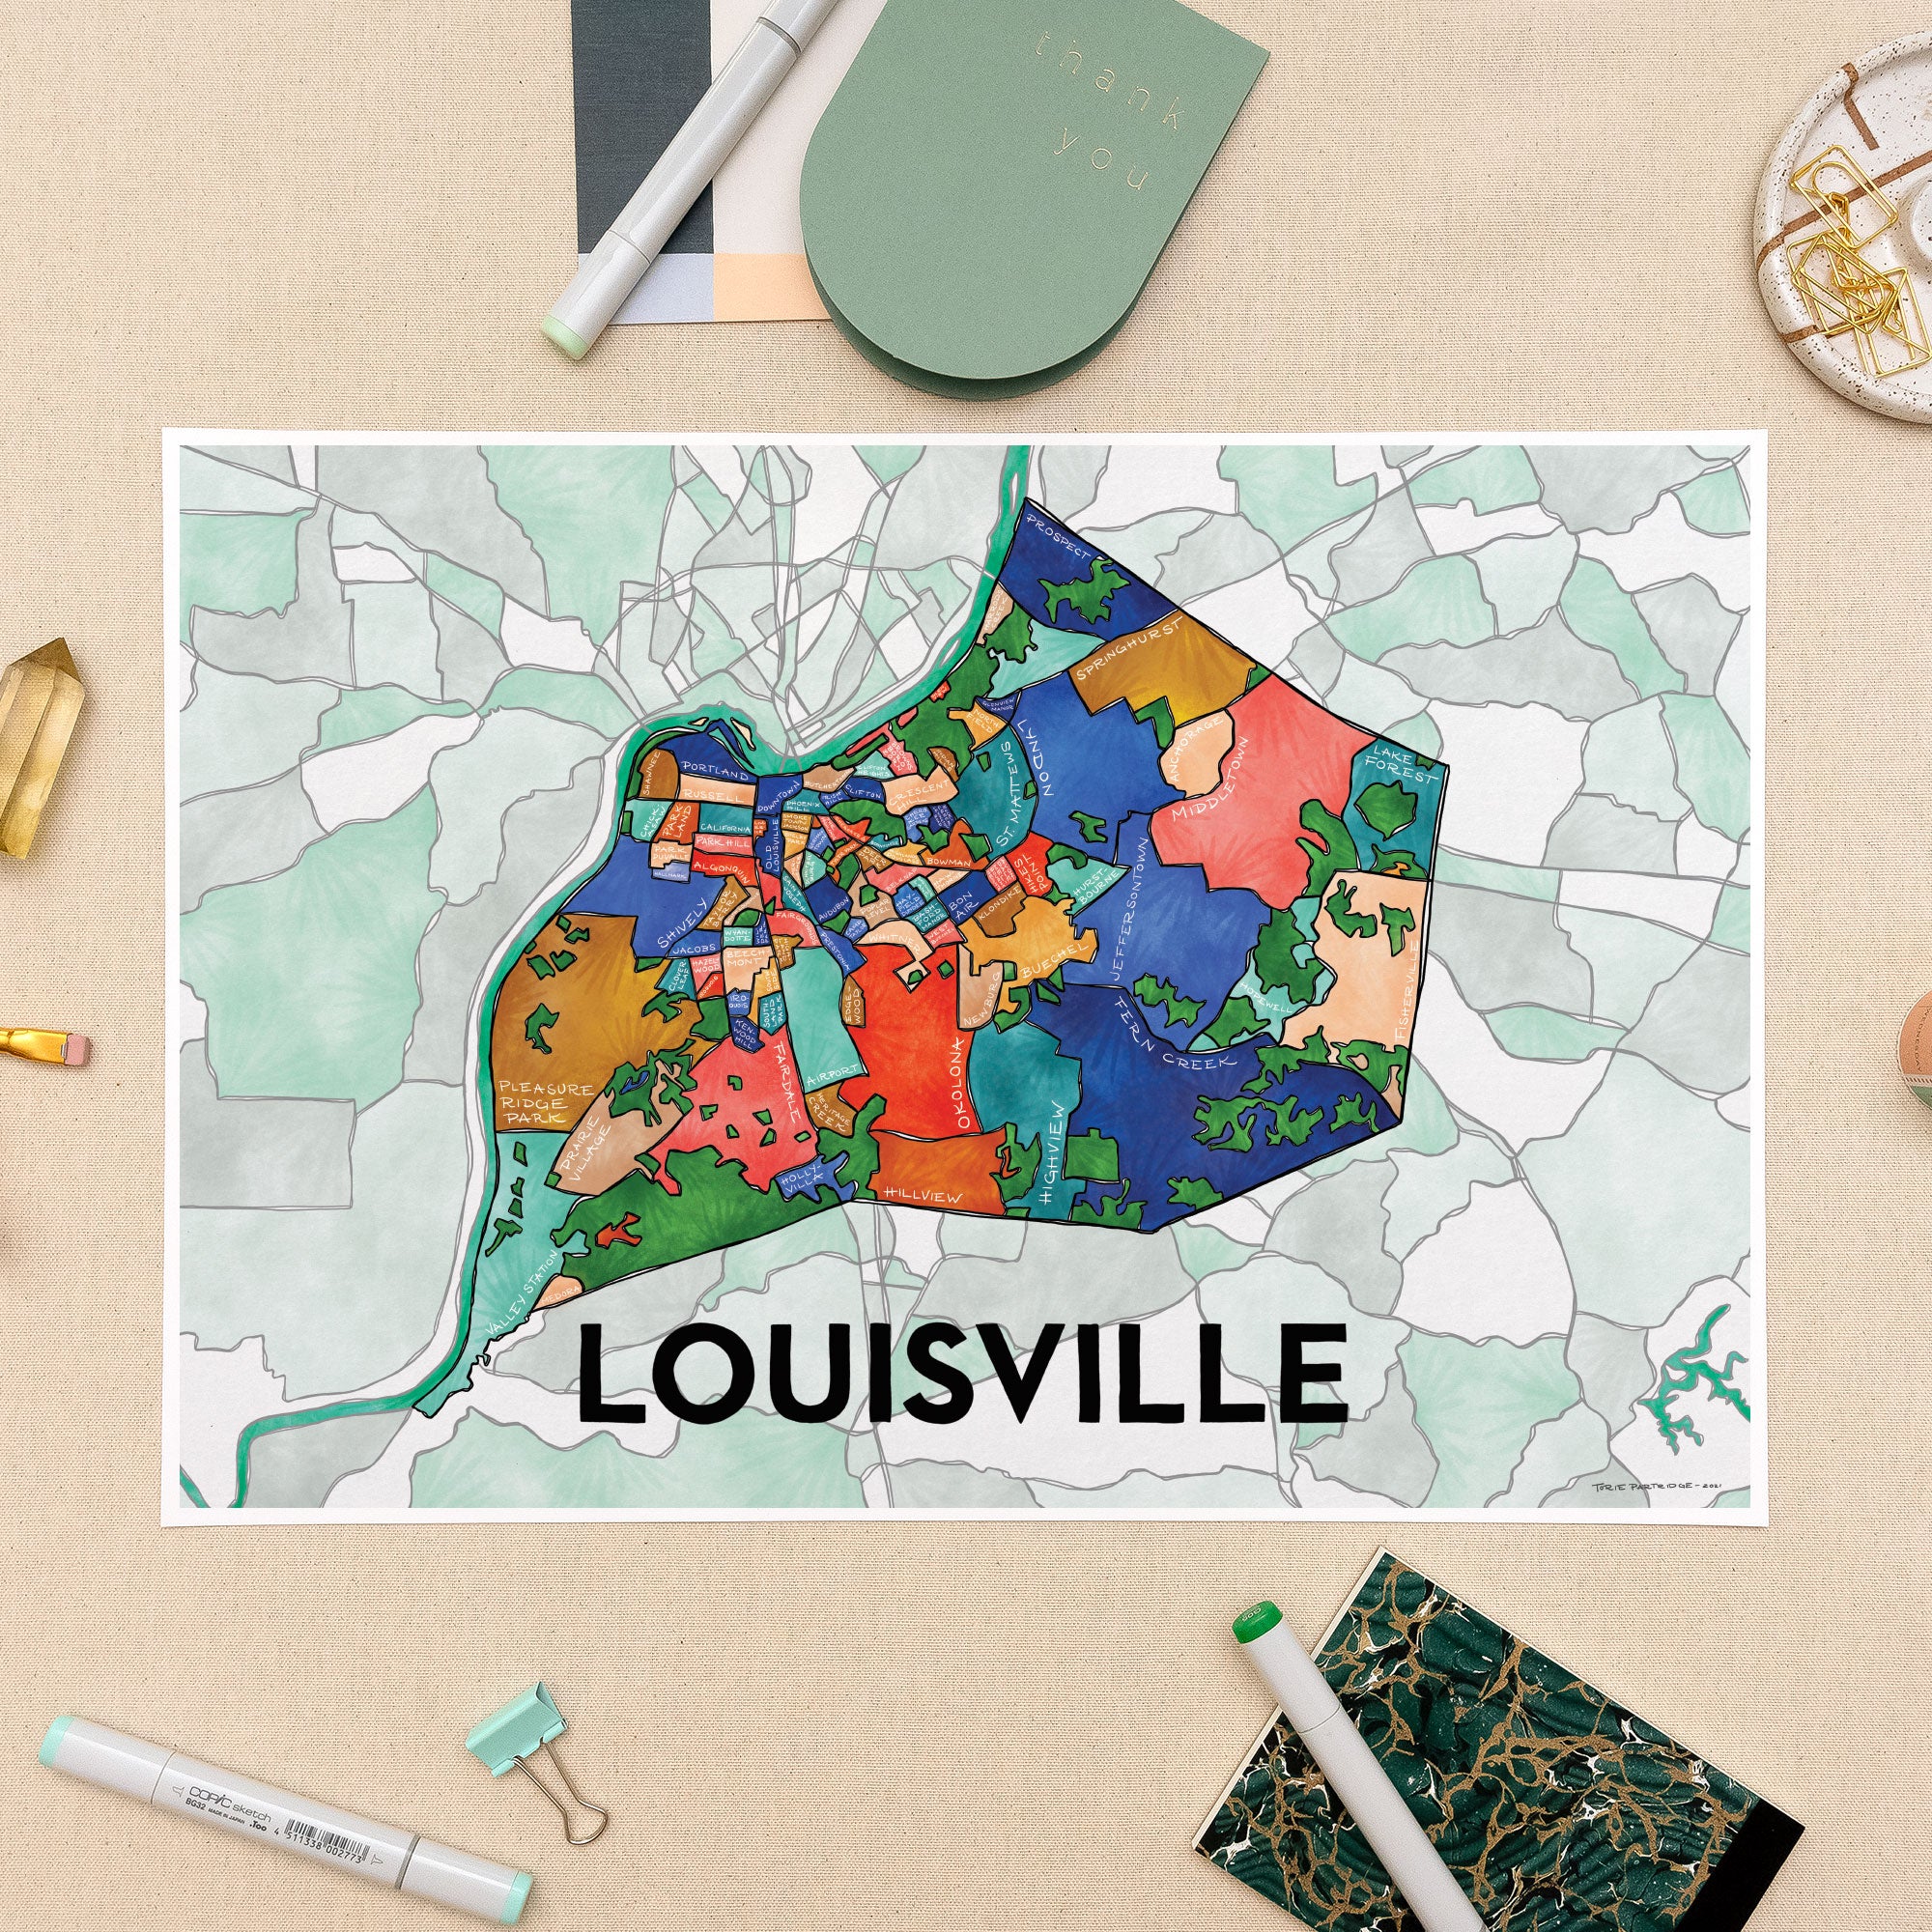 Louisville - Vintage City Map Backpack by Lonely Cartographer